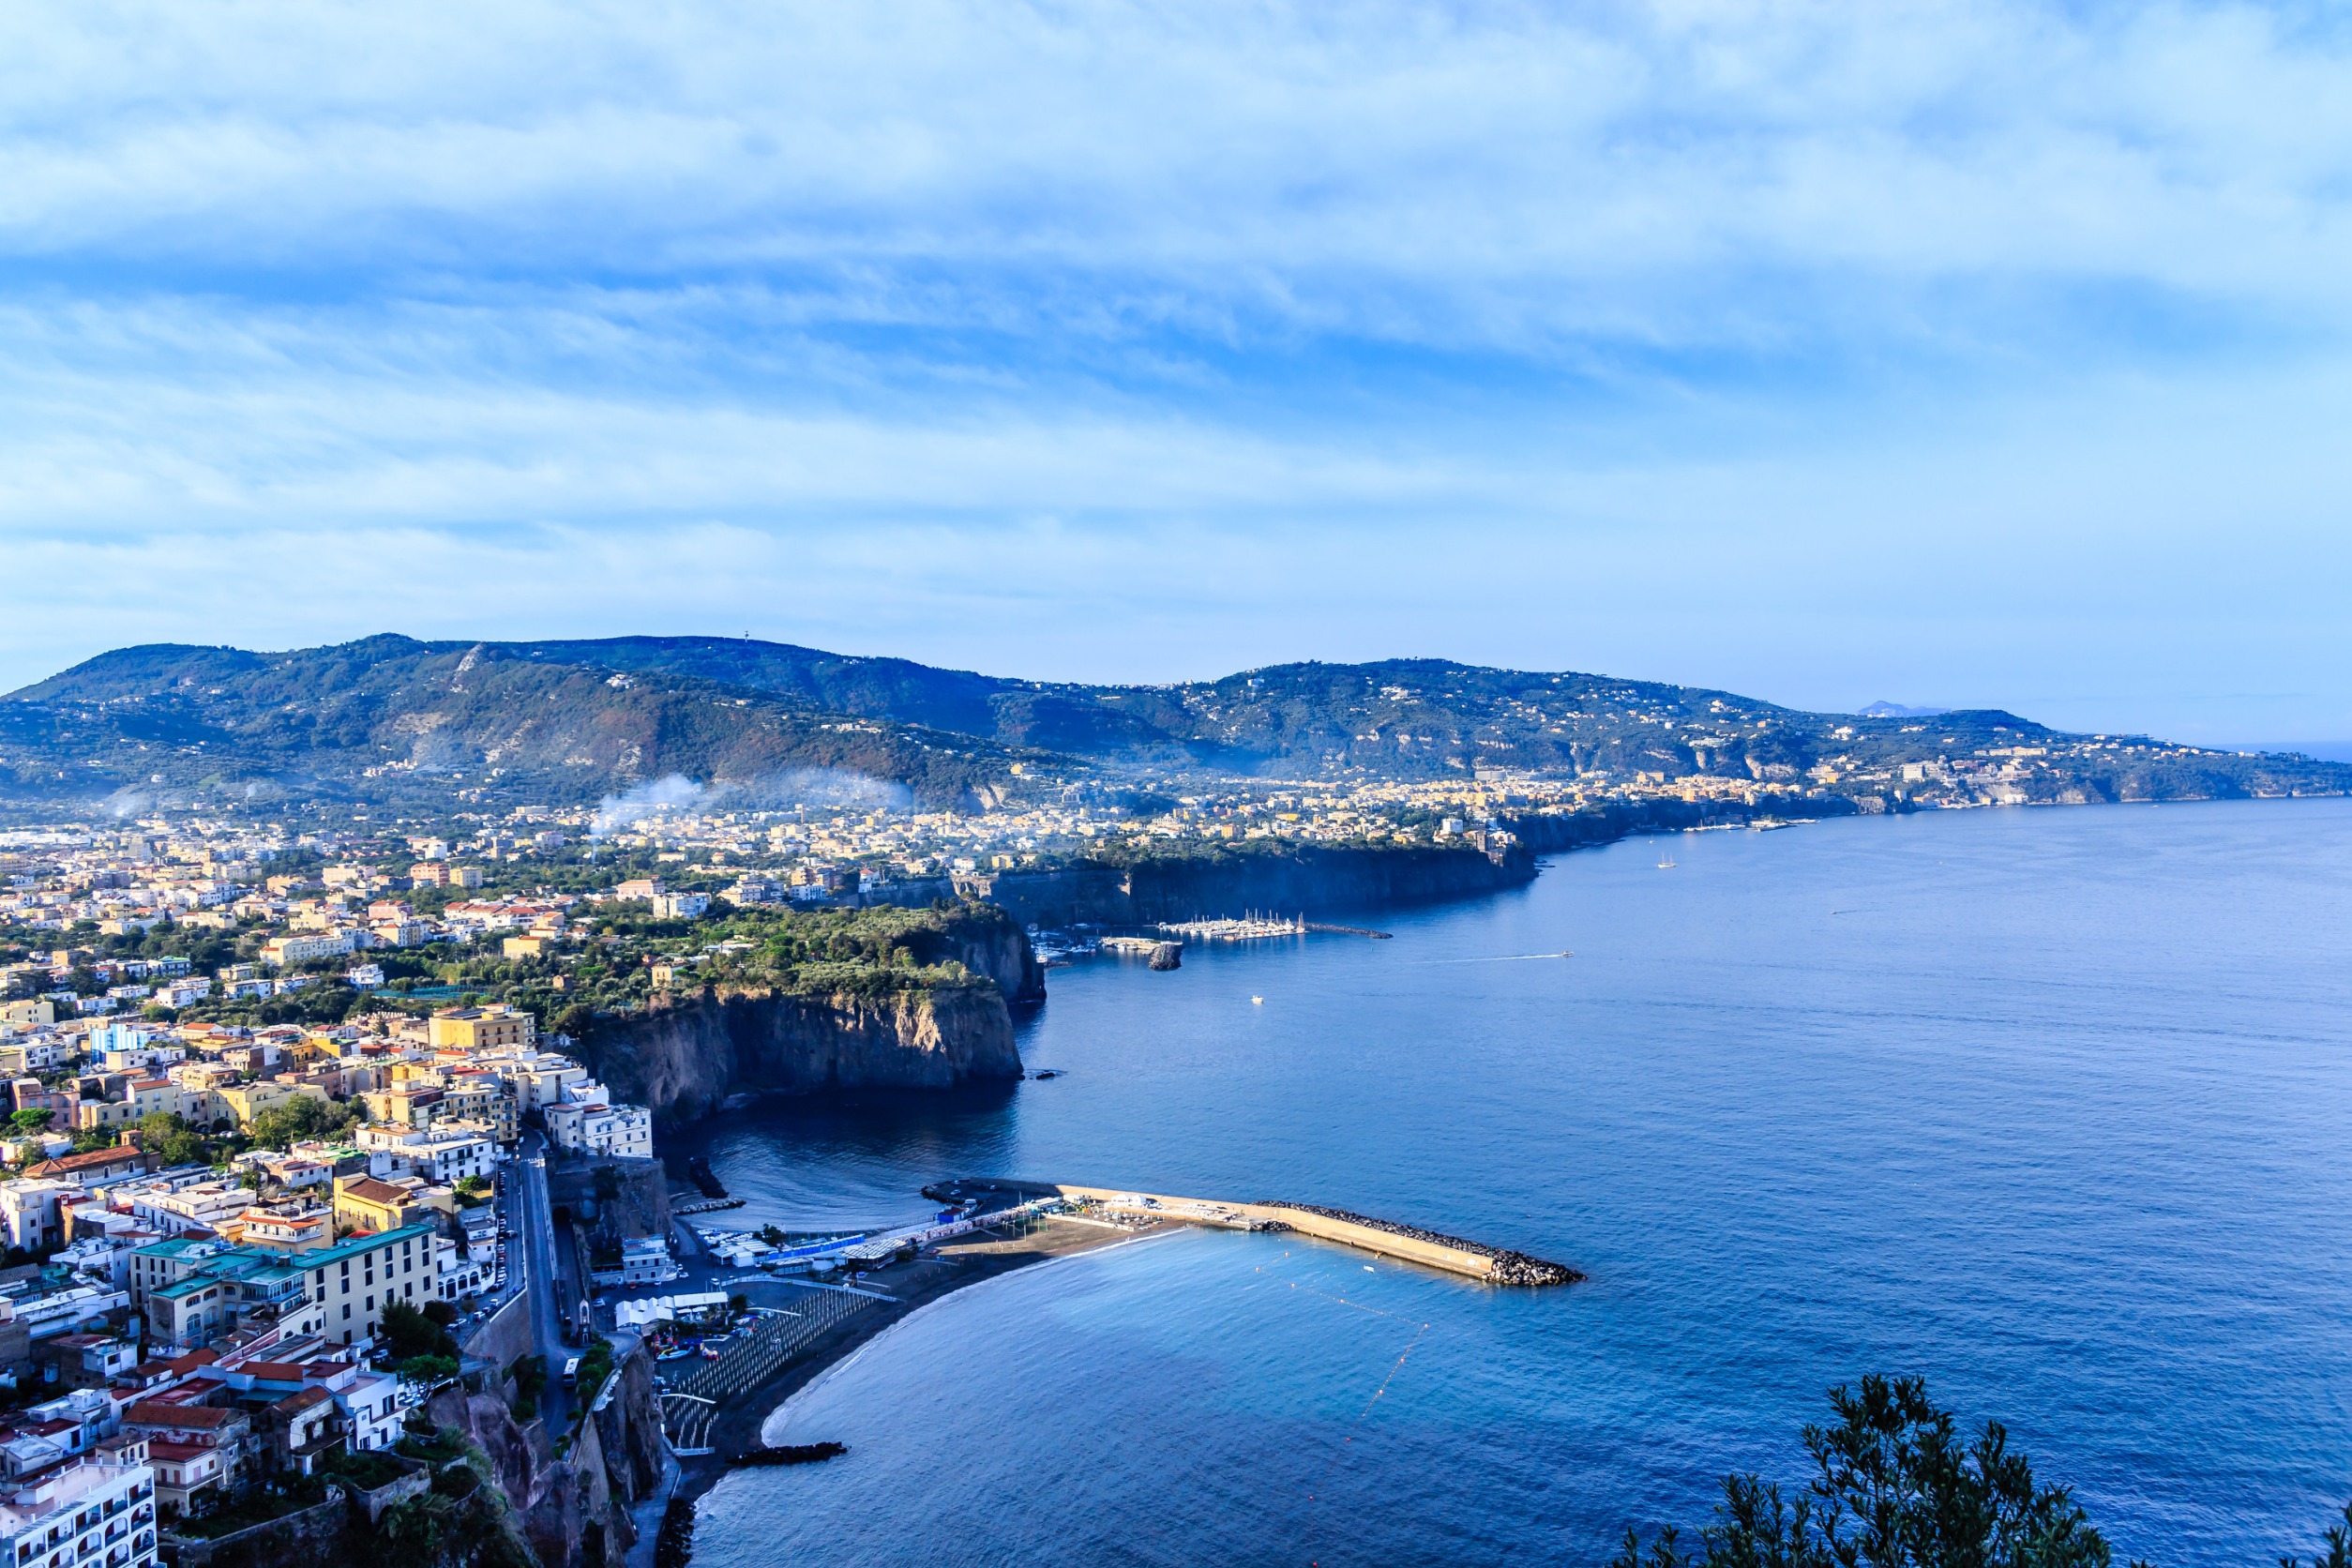 Discovering Mesmerizing Italy’s Coastlines: From Cinque Terre to Amalfi Coast